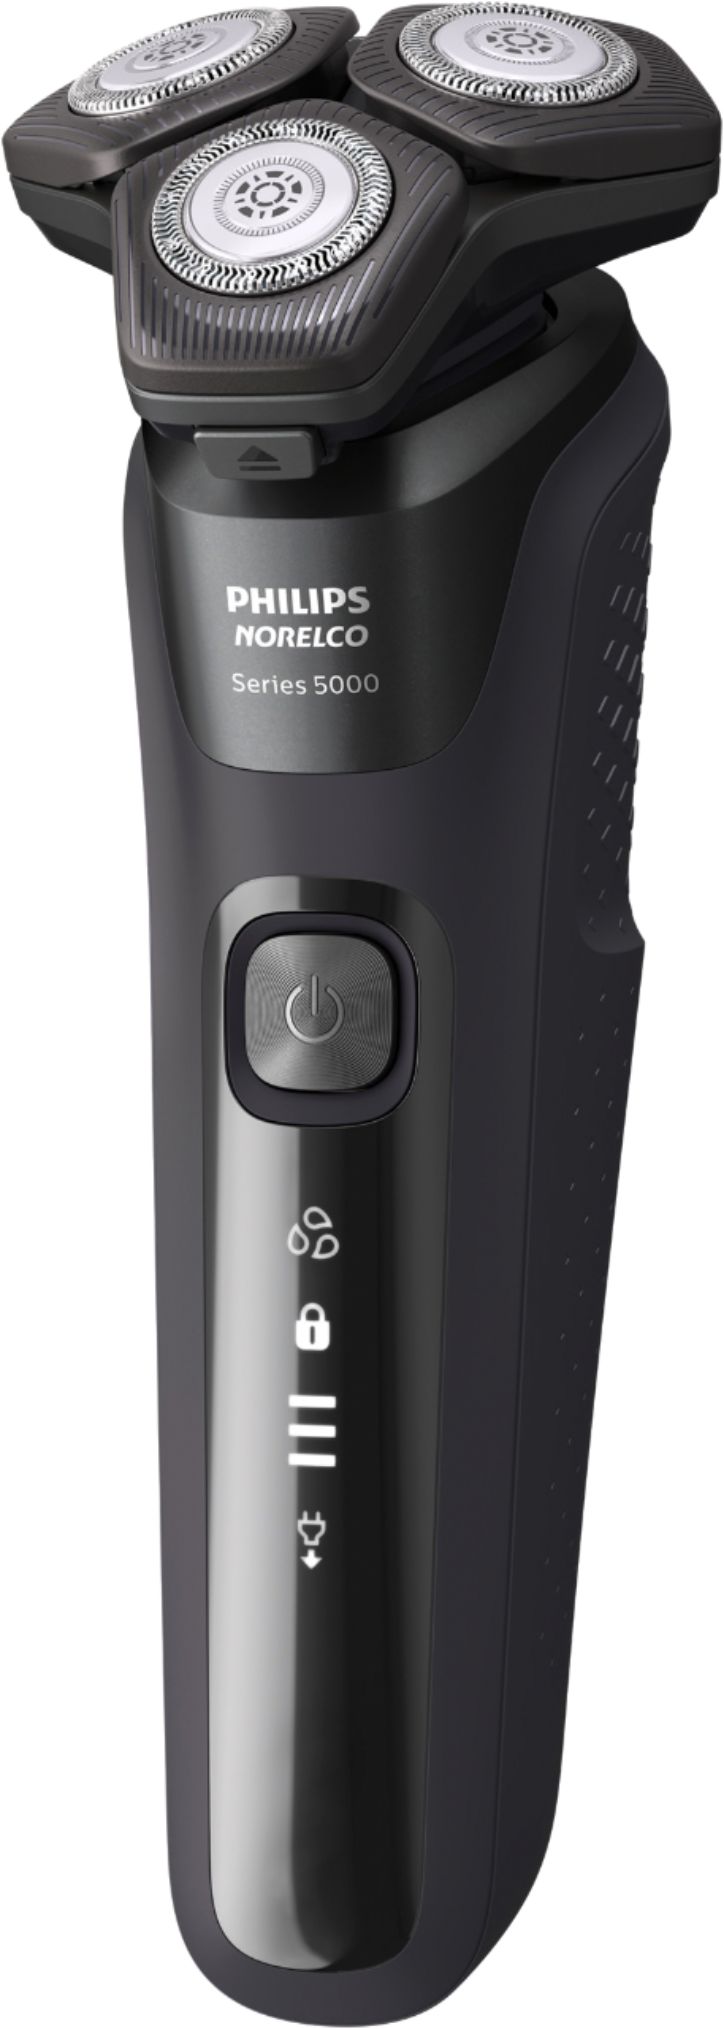 Norelco Shaver 5300 Rechargeable Wet & Dry Shaver (S5588/81)